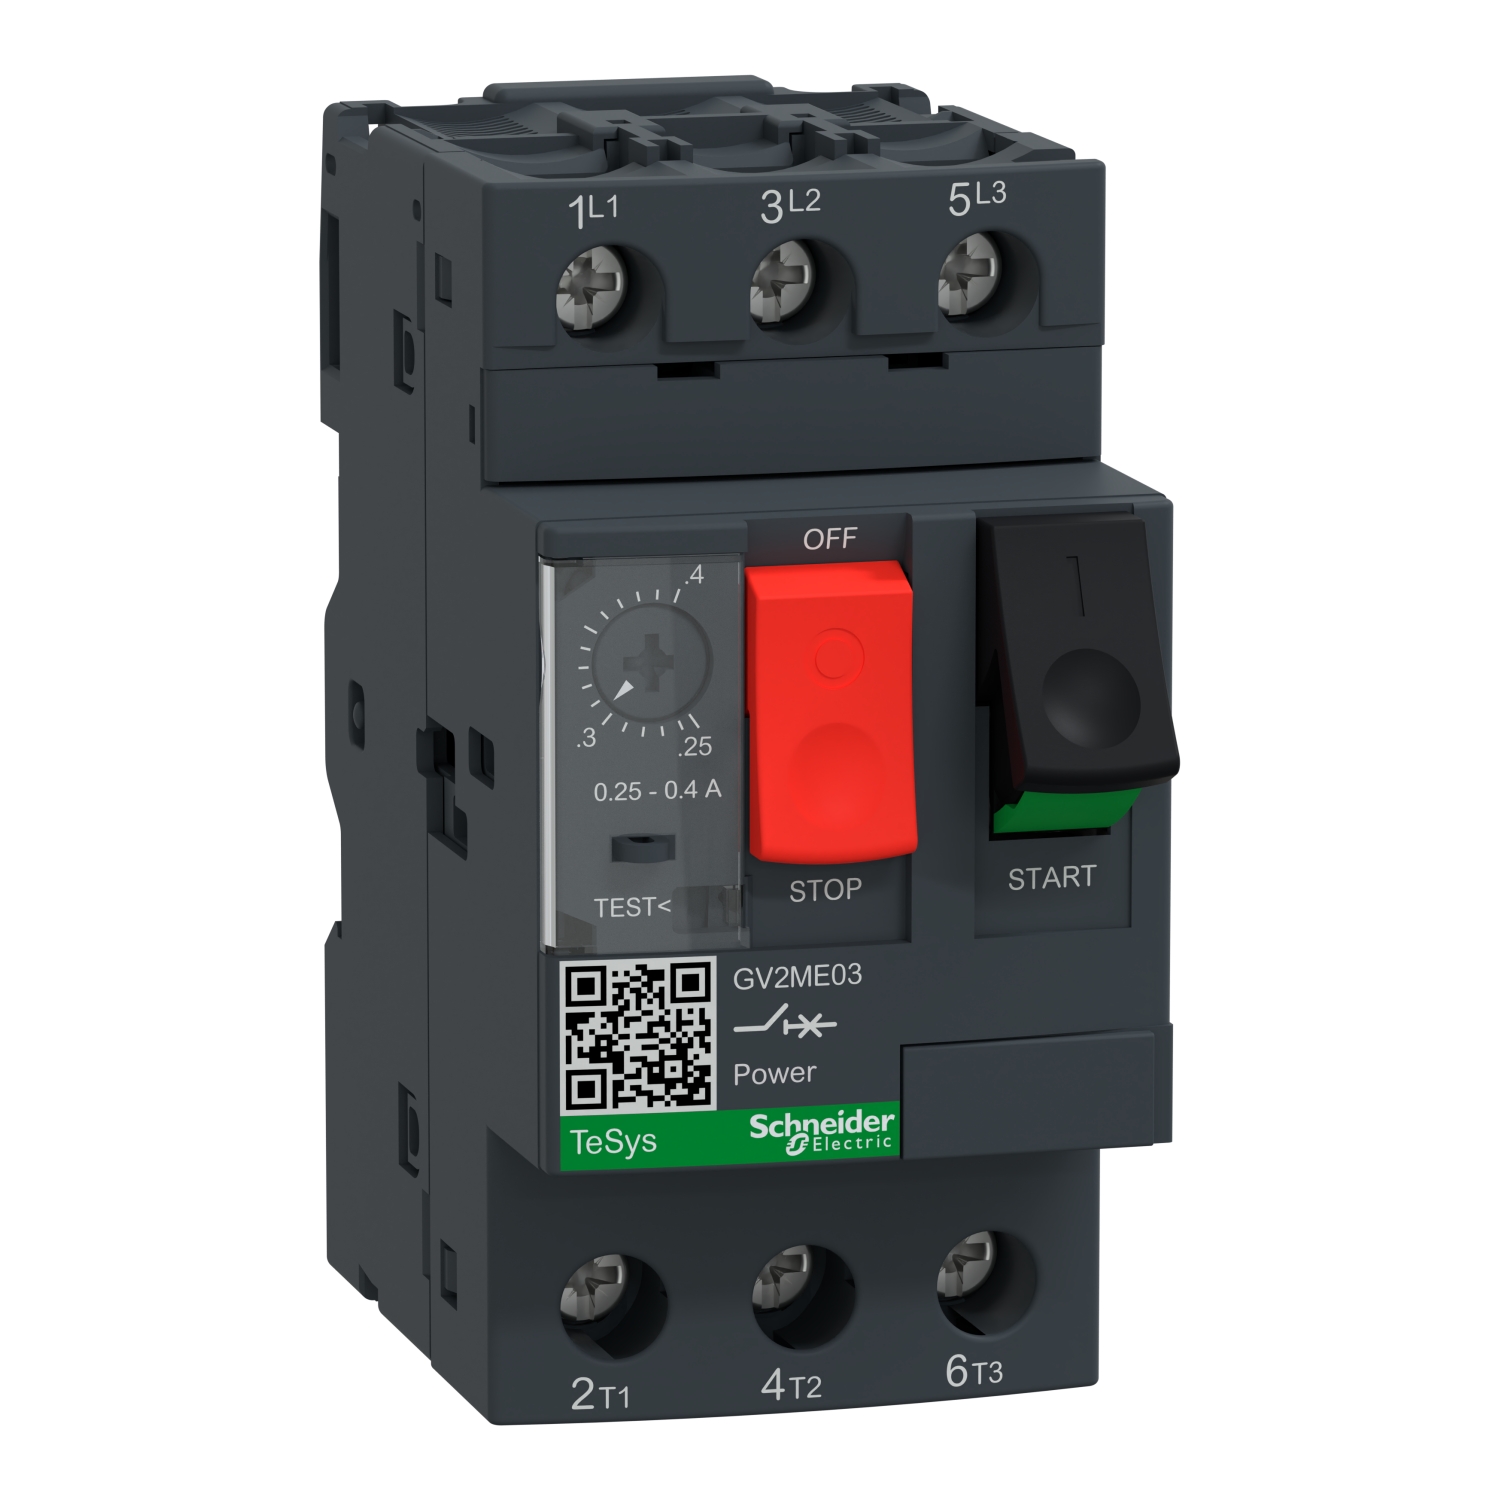 Motor circuit breaker, TeSys Deca, 3P, 0.25 to 0.4A, thermal magnetic, screw clamp terminals, button control